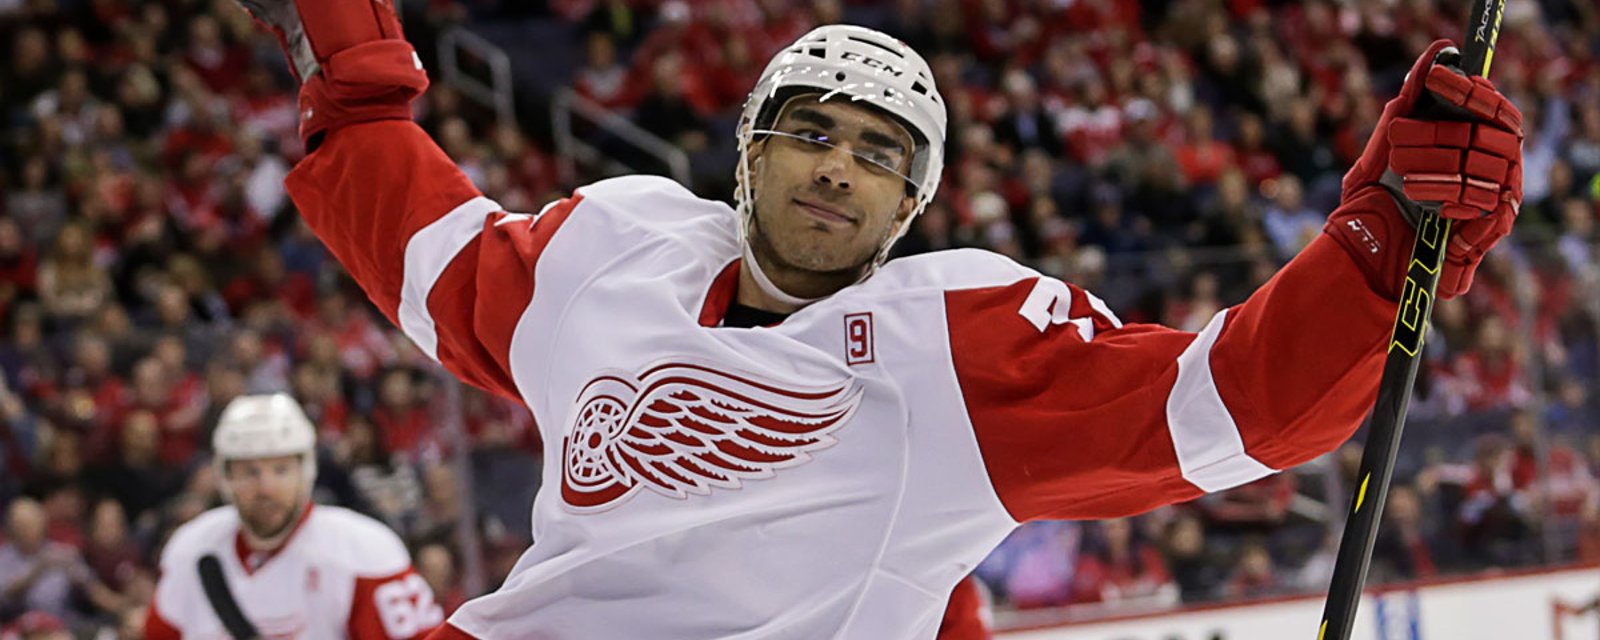 Crucial update concerning Andreas Athanasiou